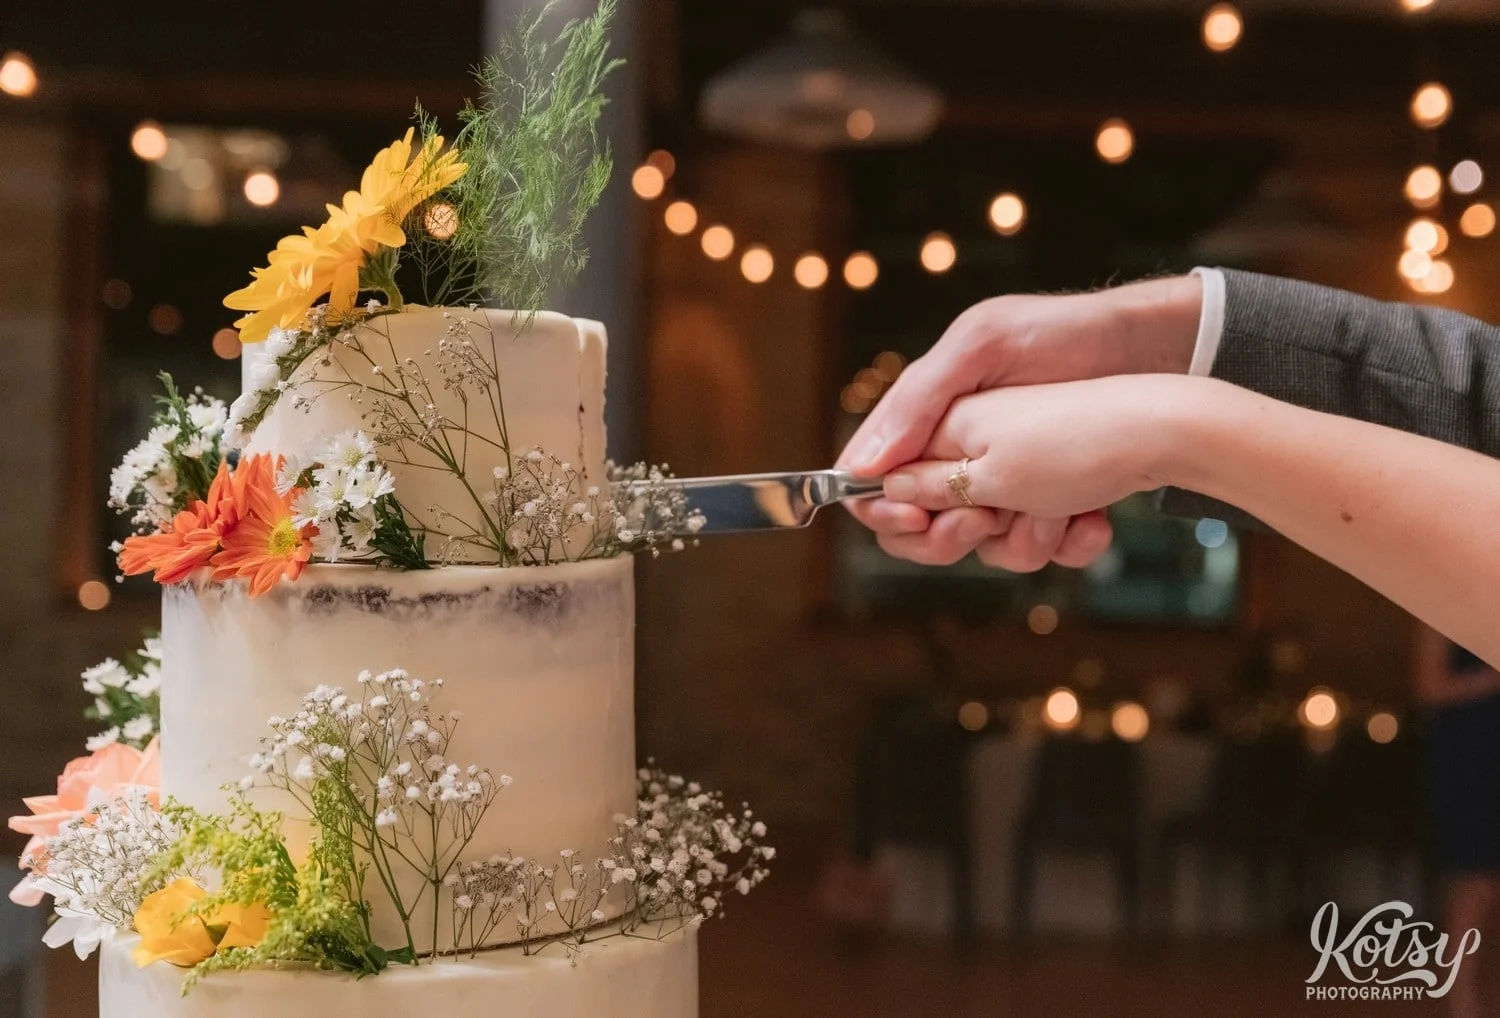 A close up shot of a pair of hands cutting a three tier wedding cake with a butter knife during a Second Floor Events wedding reception in Toronto, Canada.